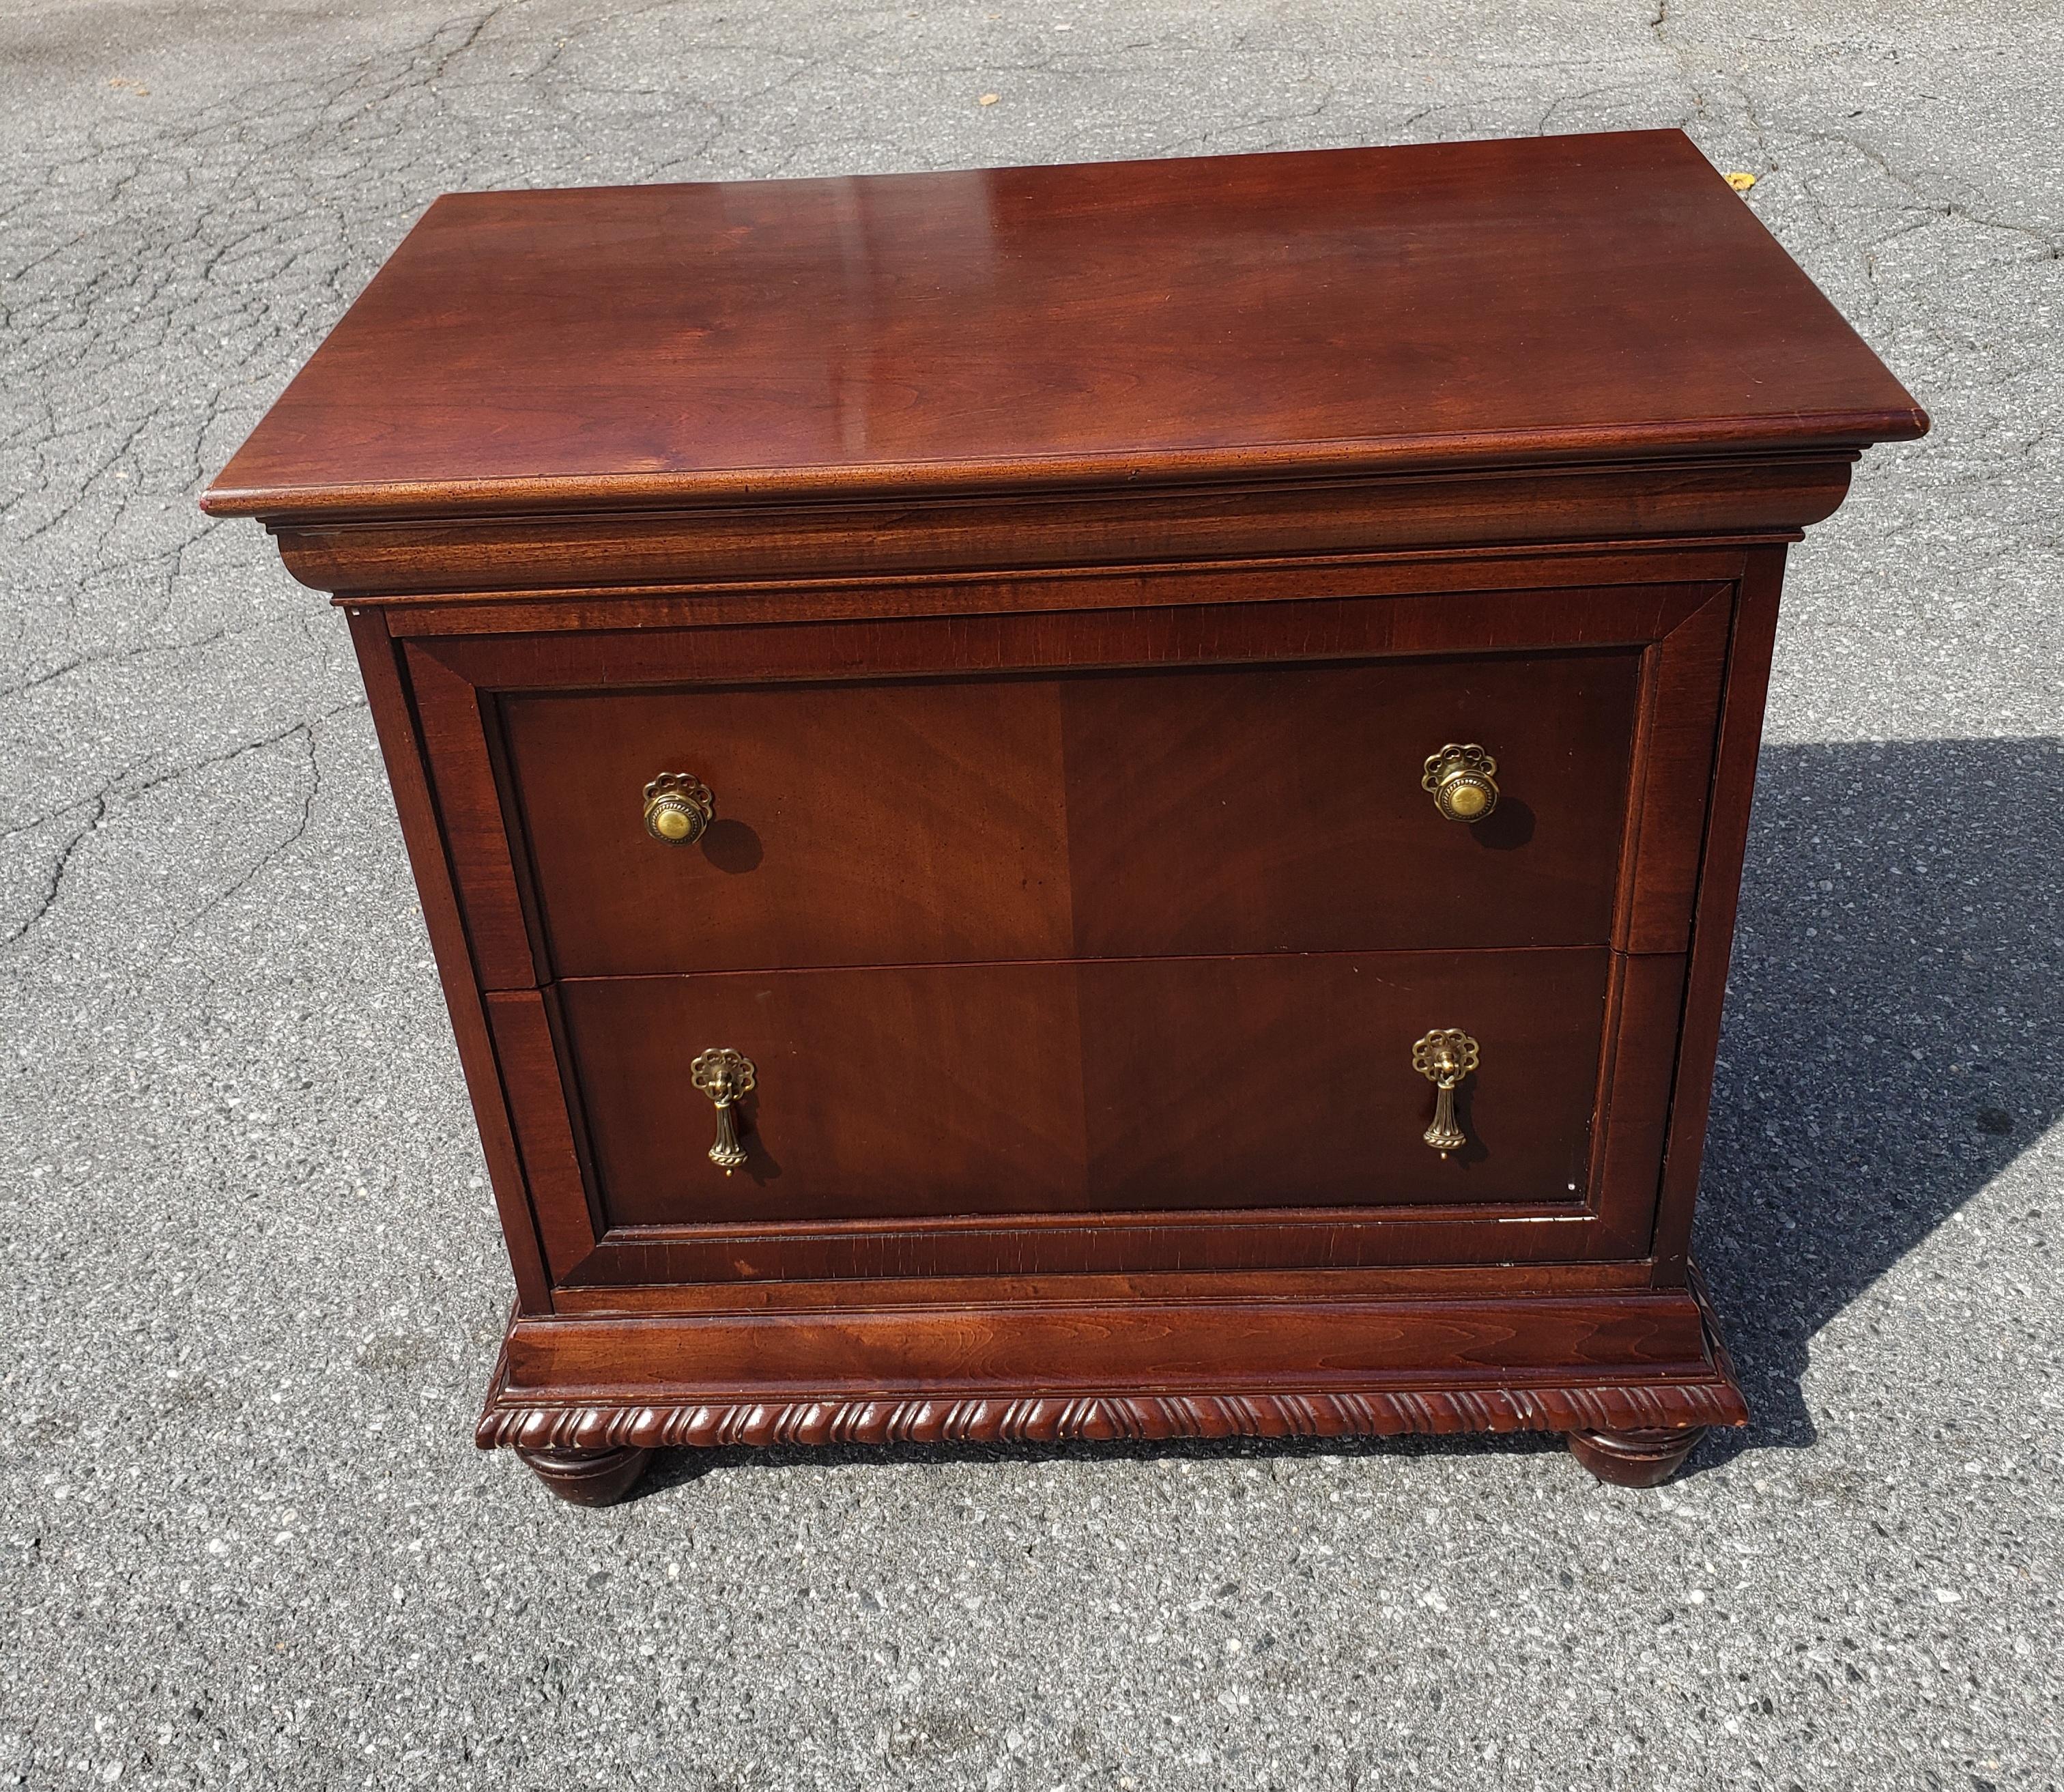 Modern National Mt Airy Bookmatched Mahogany Bedside Chest of Drawers / Nighstand For Sale